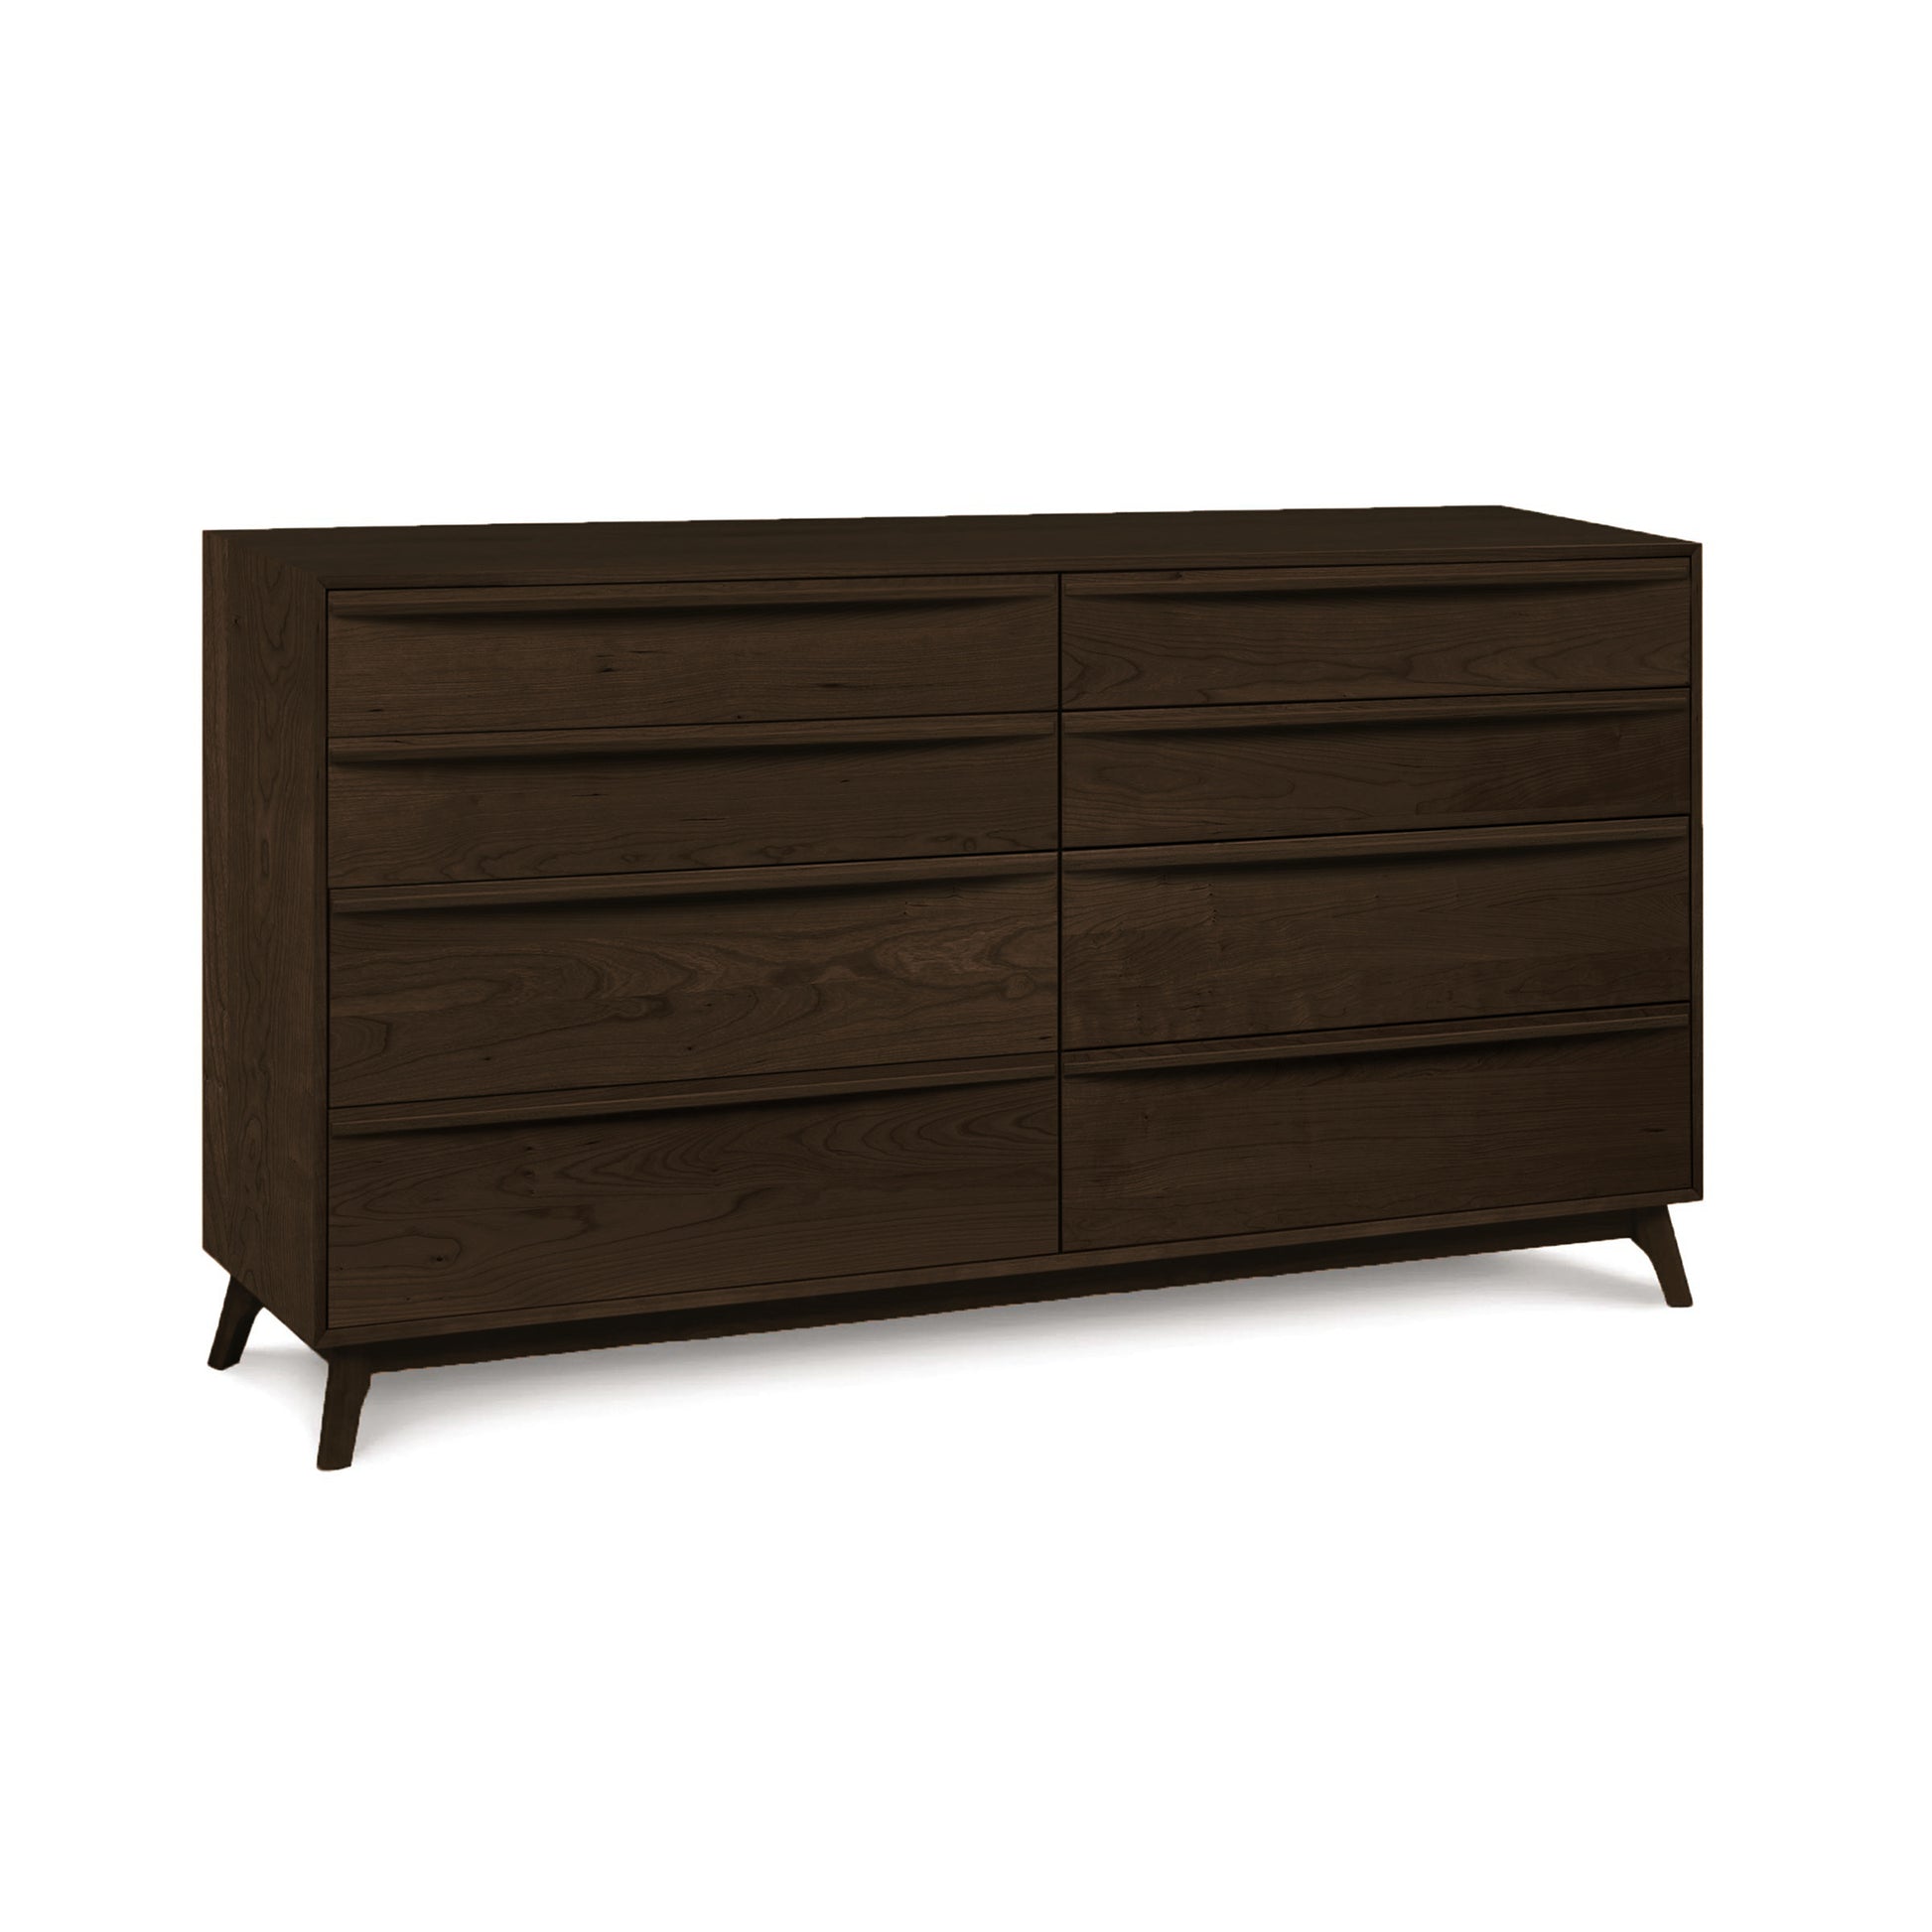 A Catalina 8-Drawer Dresser by Copeland Furniture in dark brown with drawers on a white background.